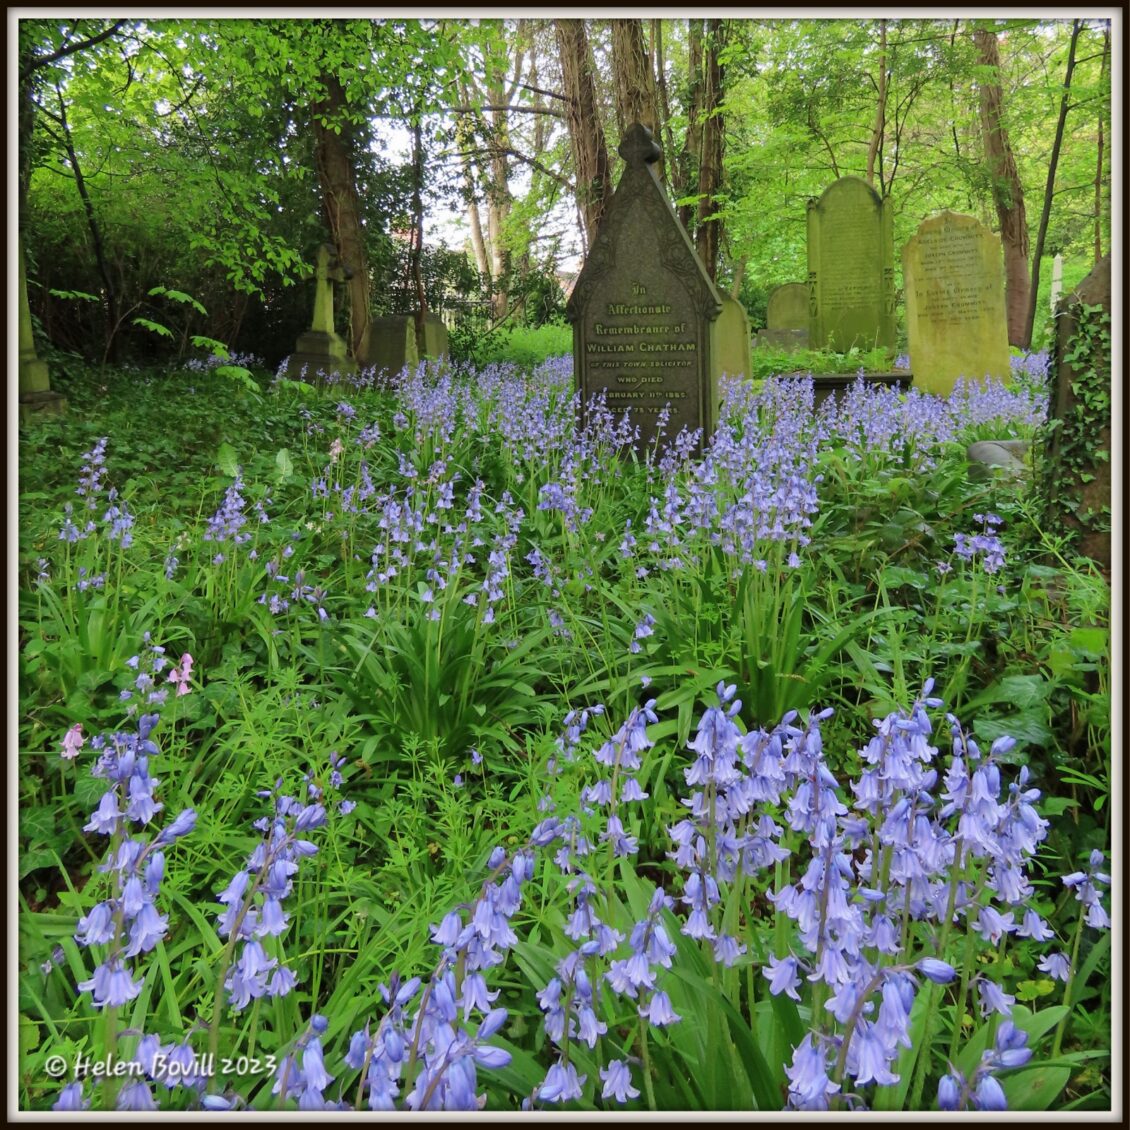 Bluebells surround some headstones in the cemetery